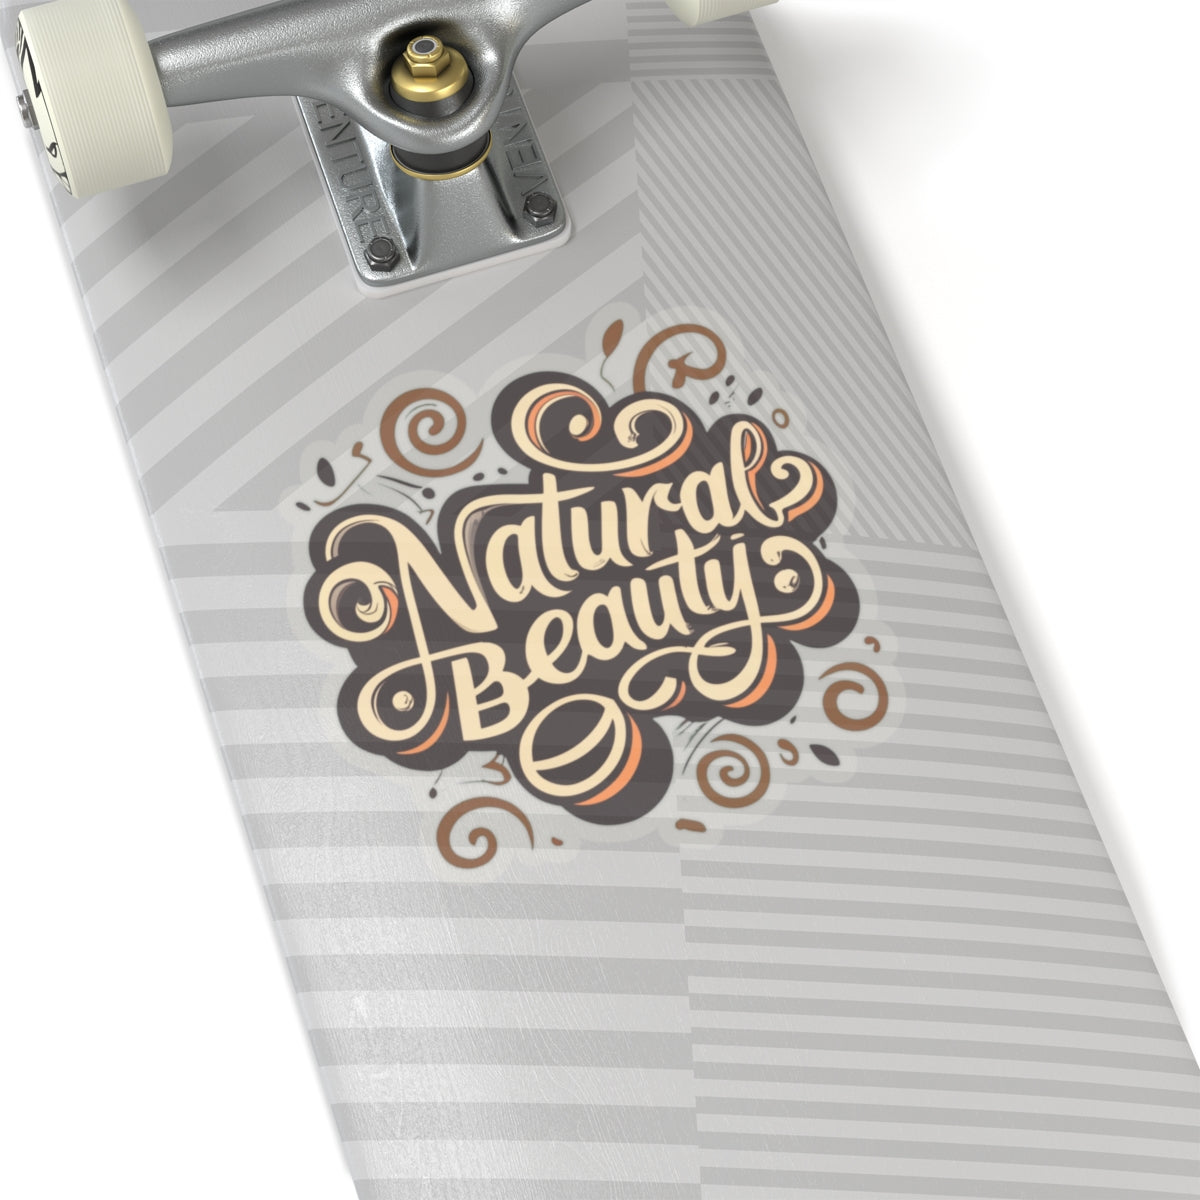 "Natural Beauty" Stickers